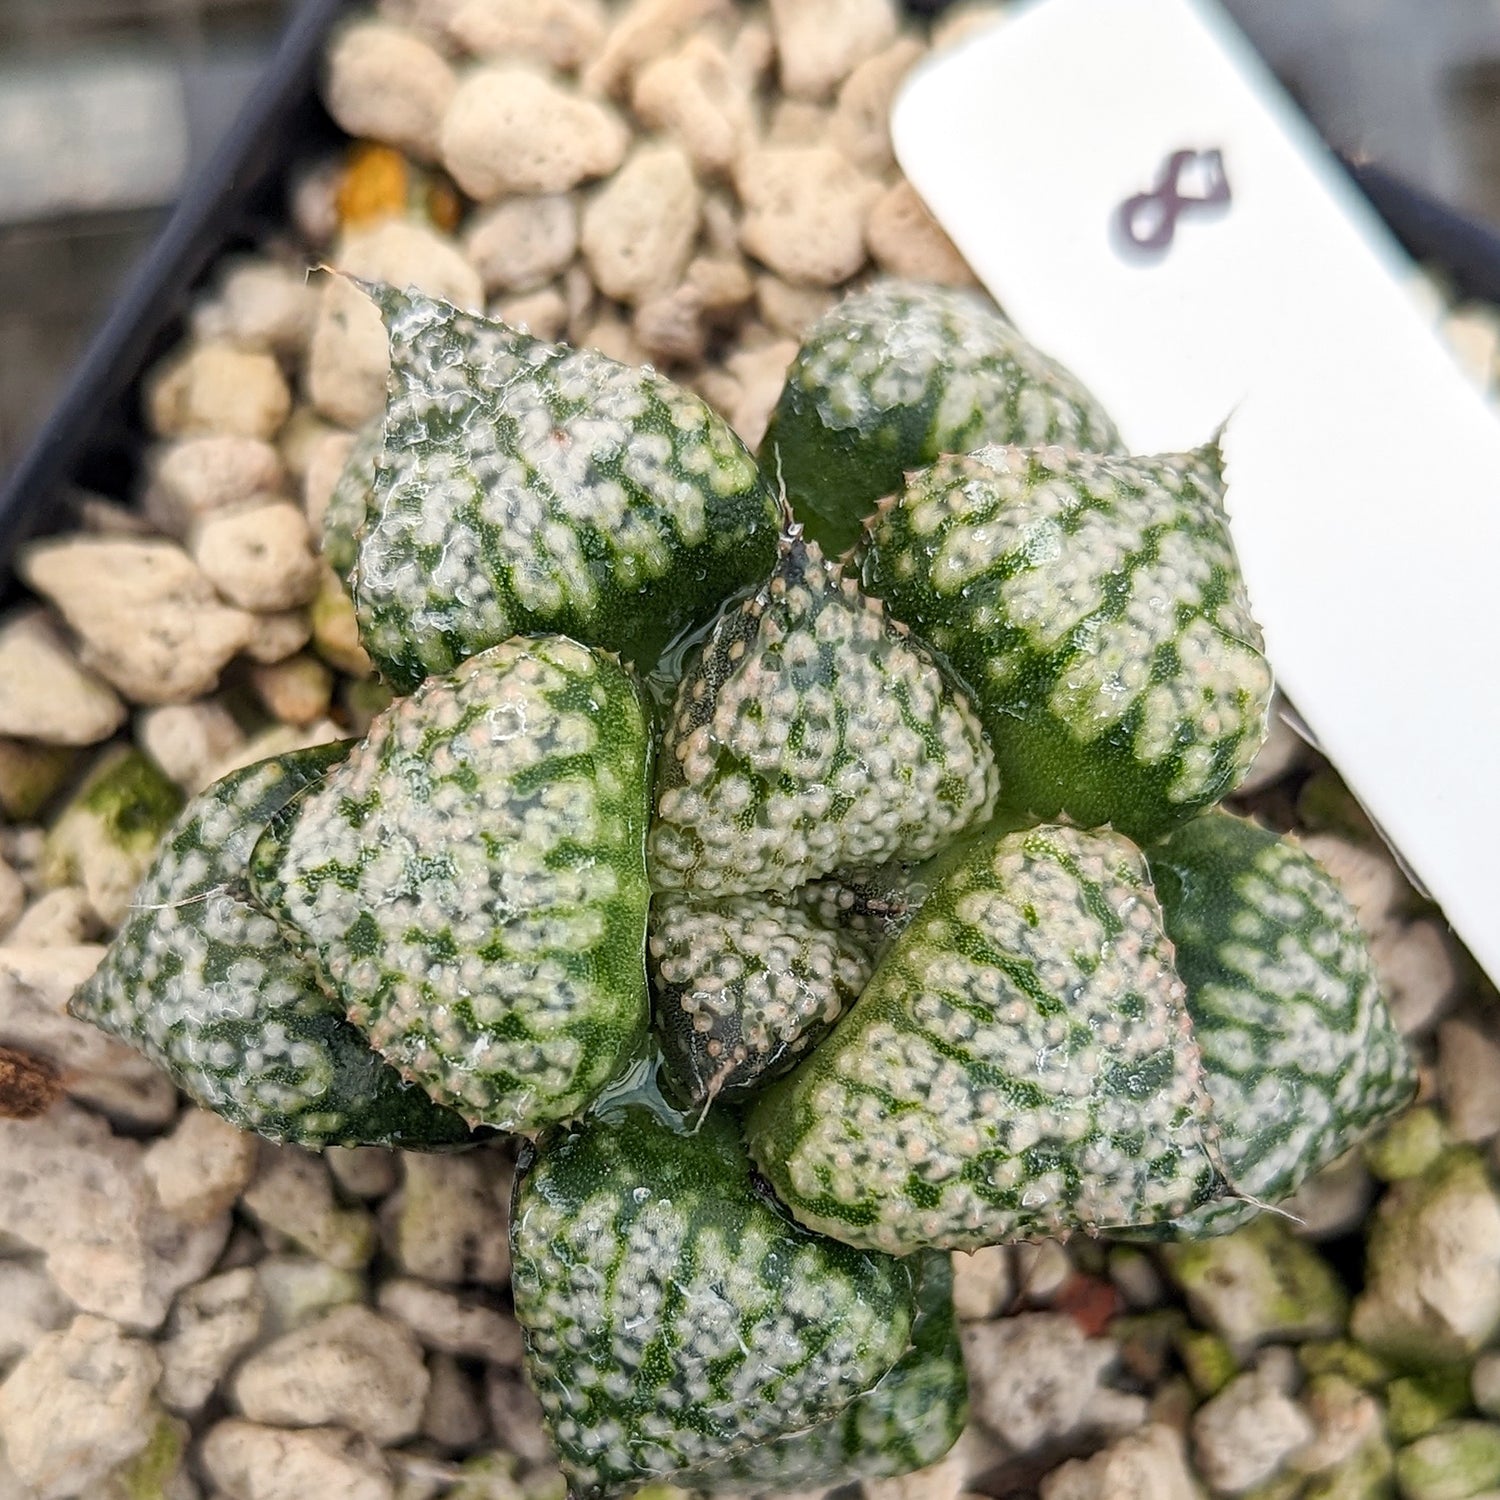 Haworthia "PP331" picta x Empress hybrid series #8 SOLD OUT